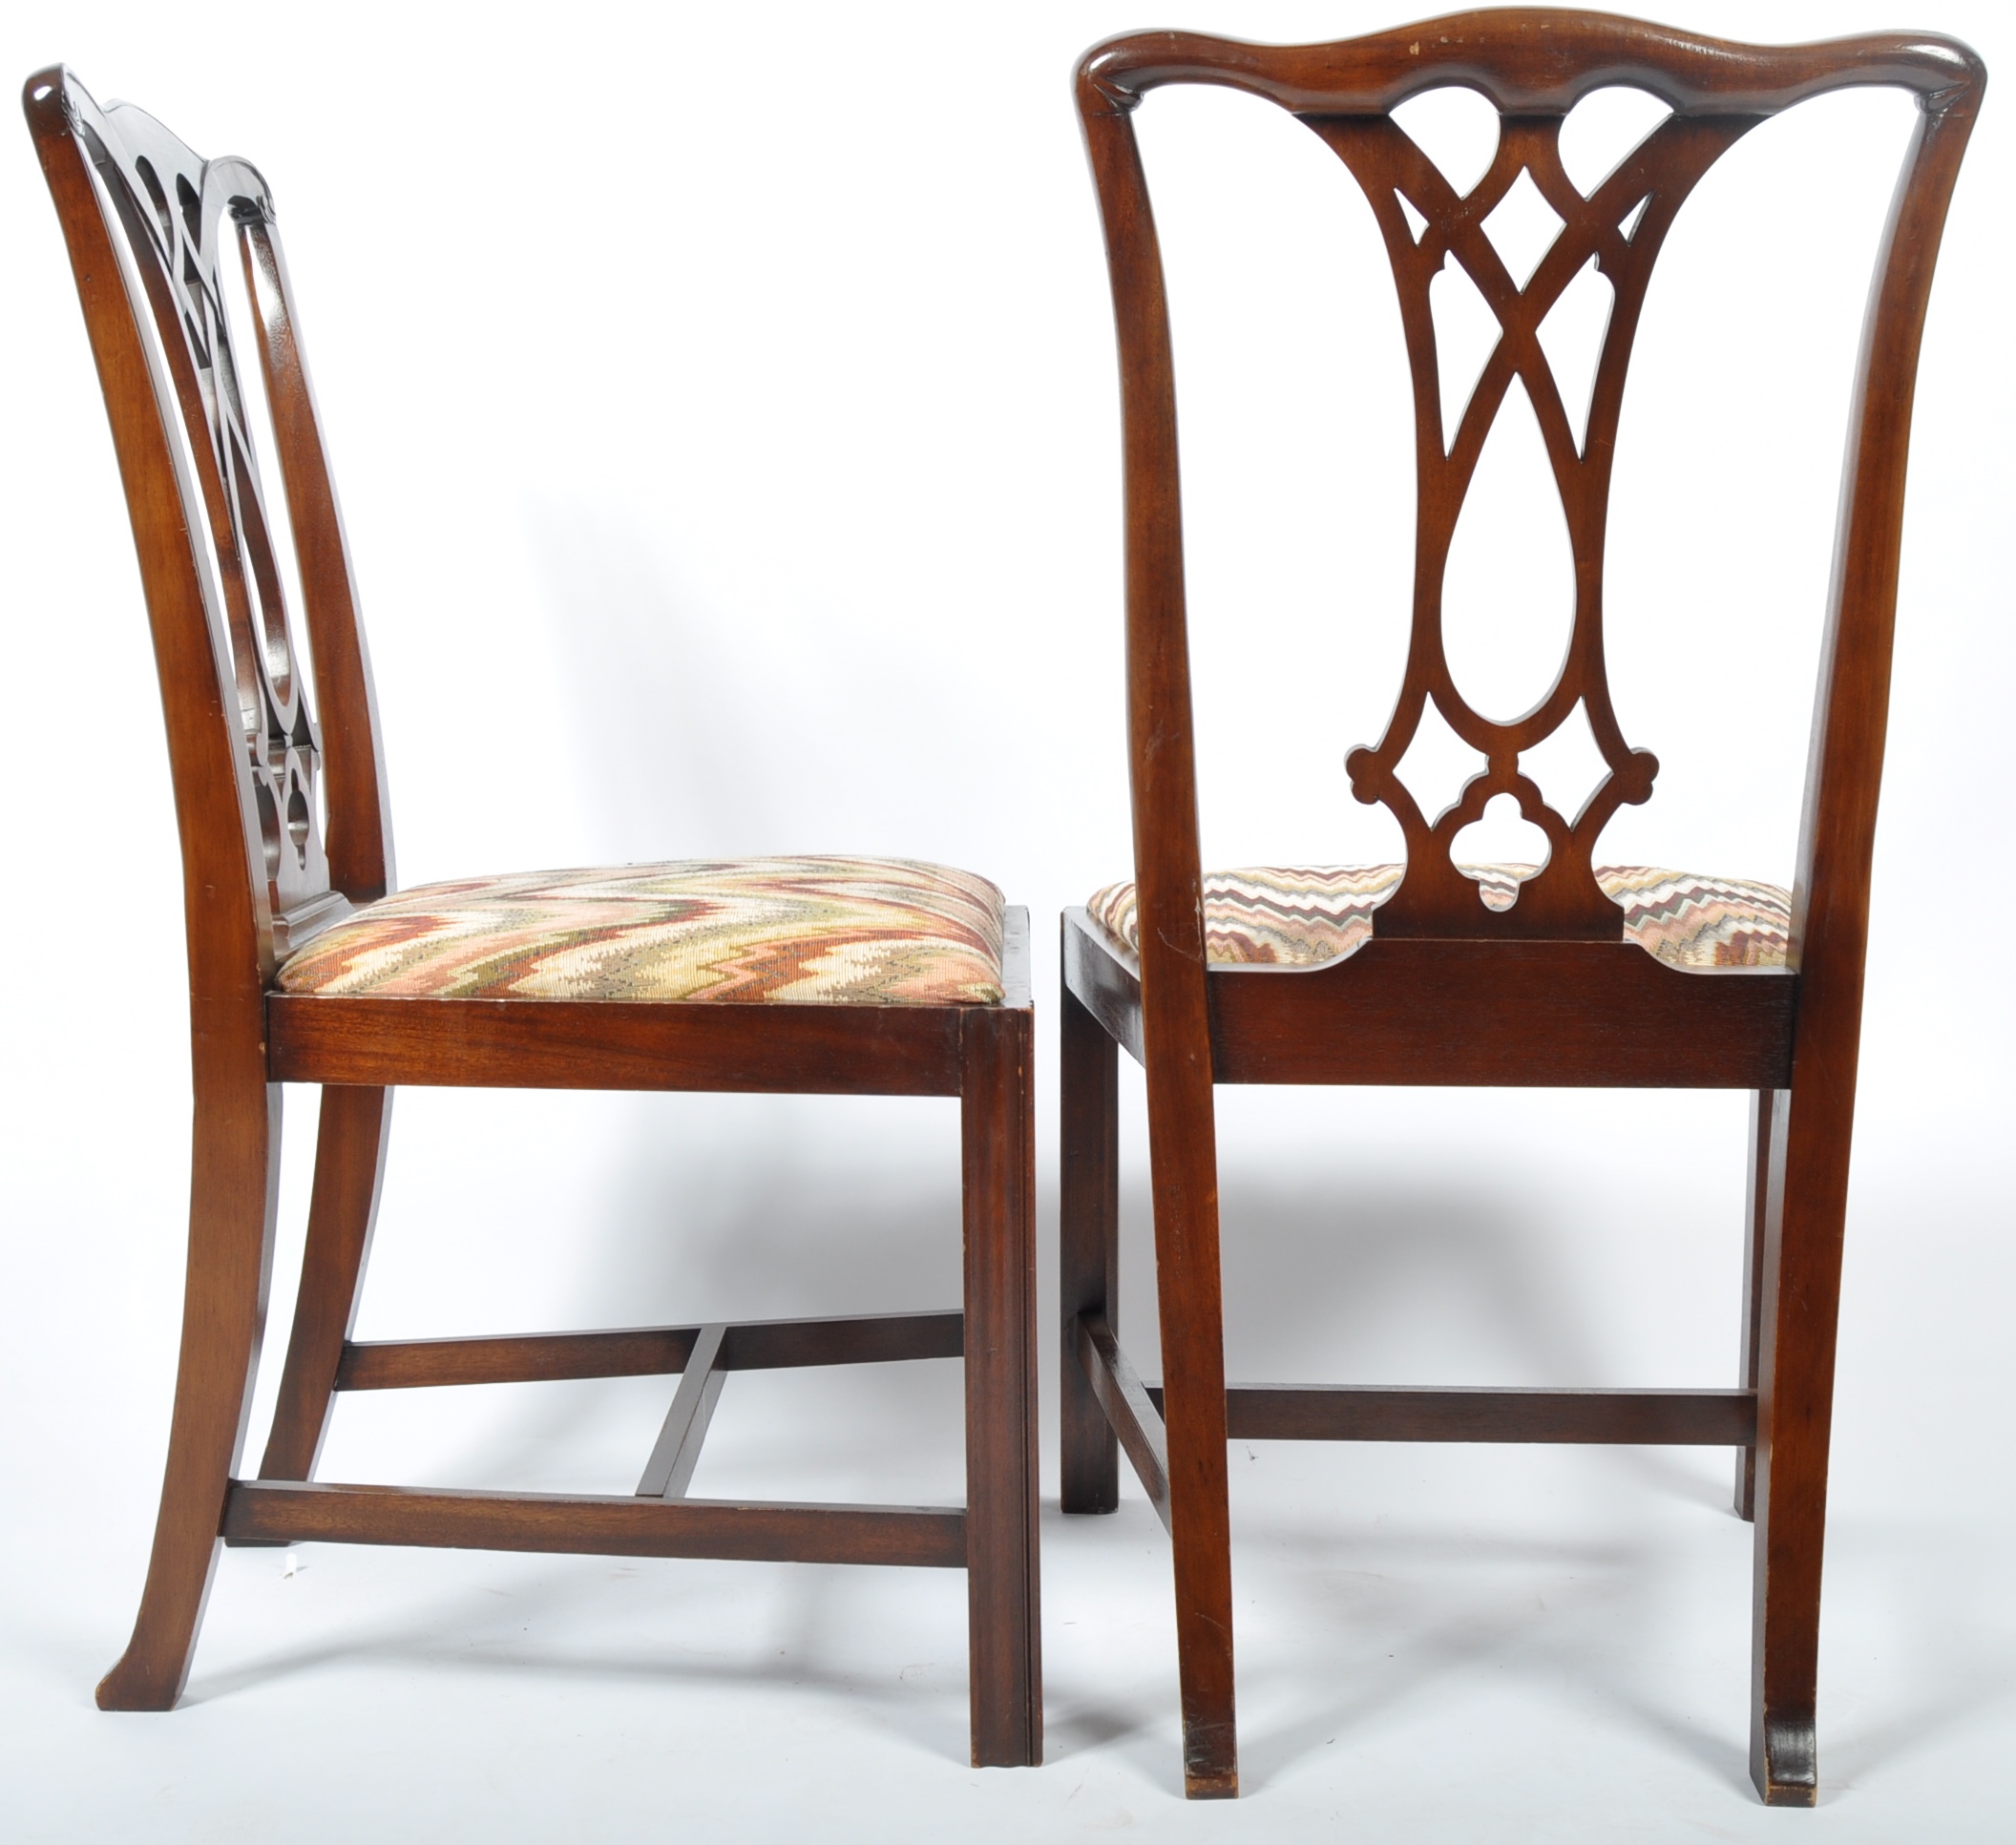 SET OF SIX 20TH CENTURY CHIPPENDALE REVIVAL CHAIRS - Image 7 of 8